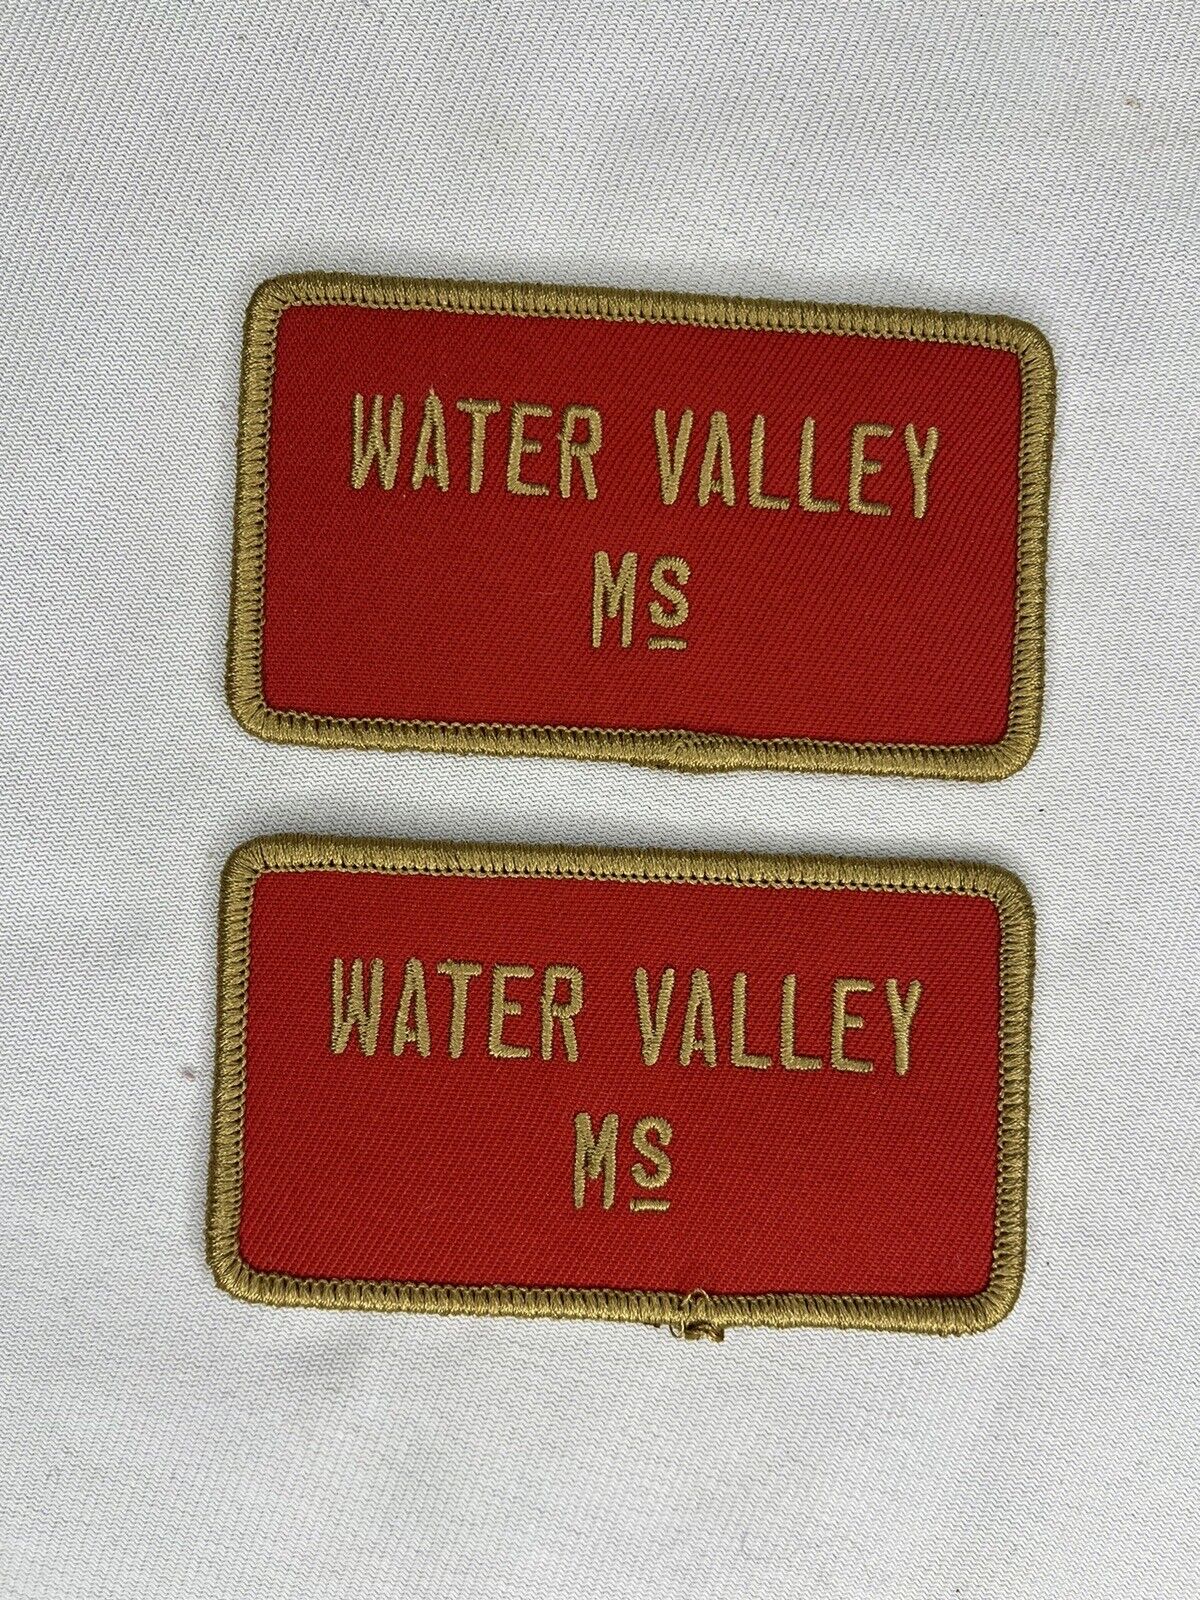 Vintage Water Valley MS Mississippi Shirt Shoulder Patches Red